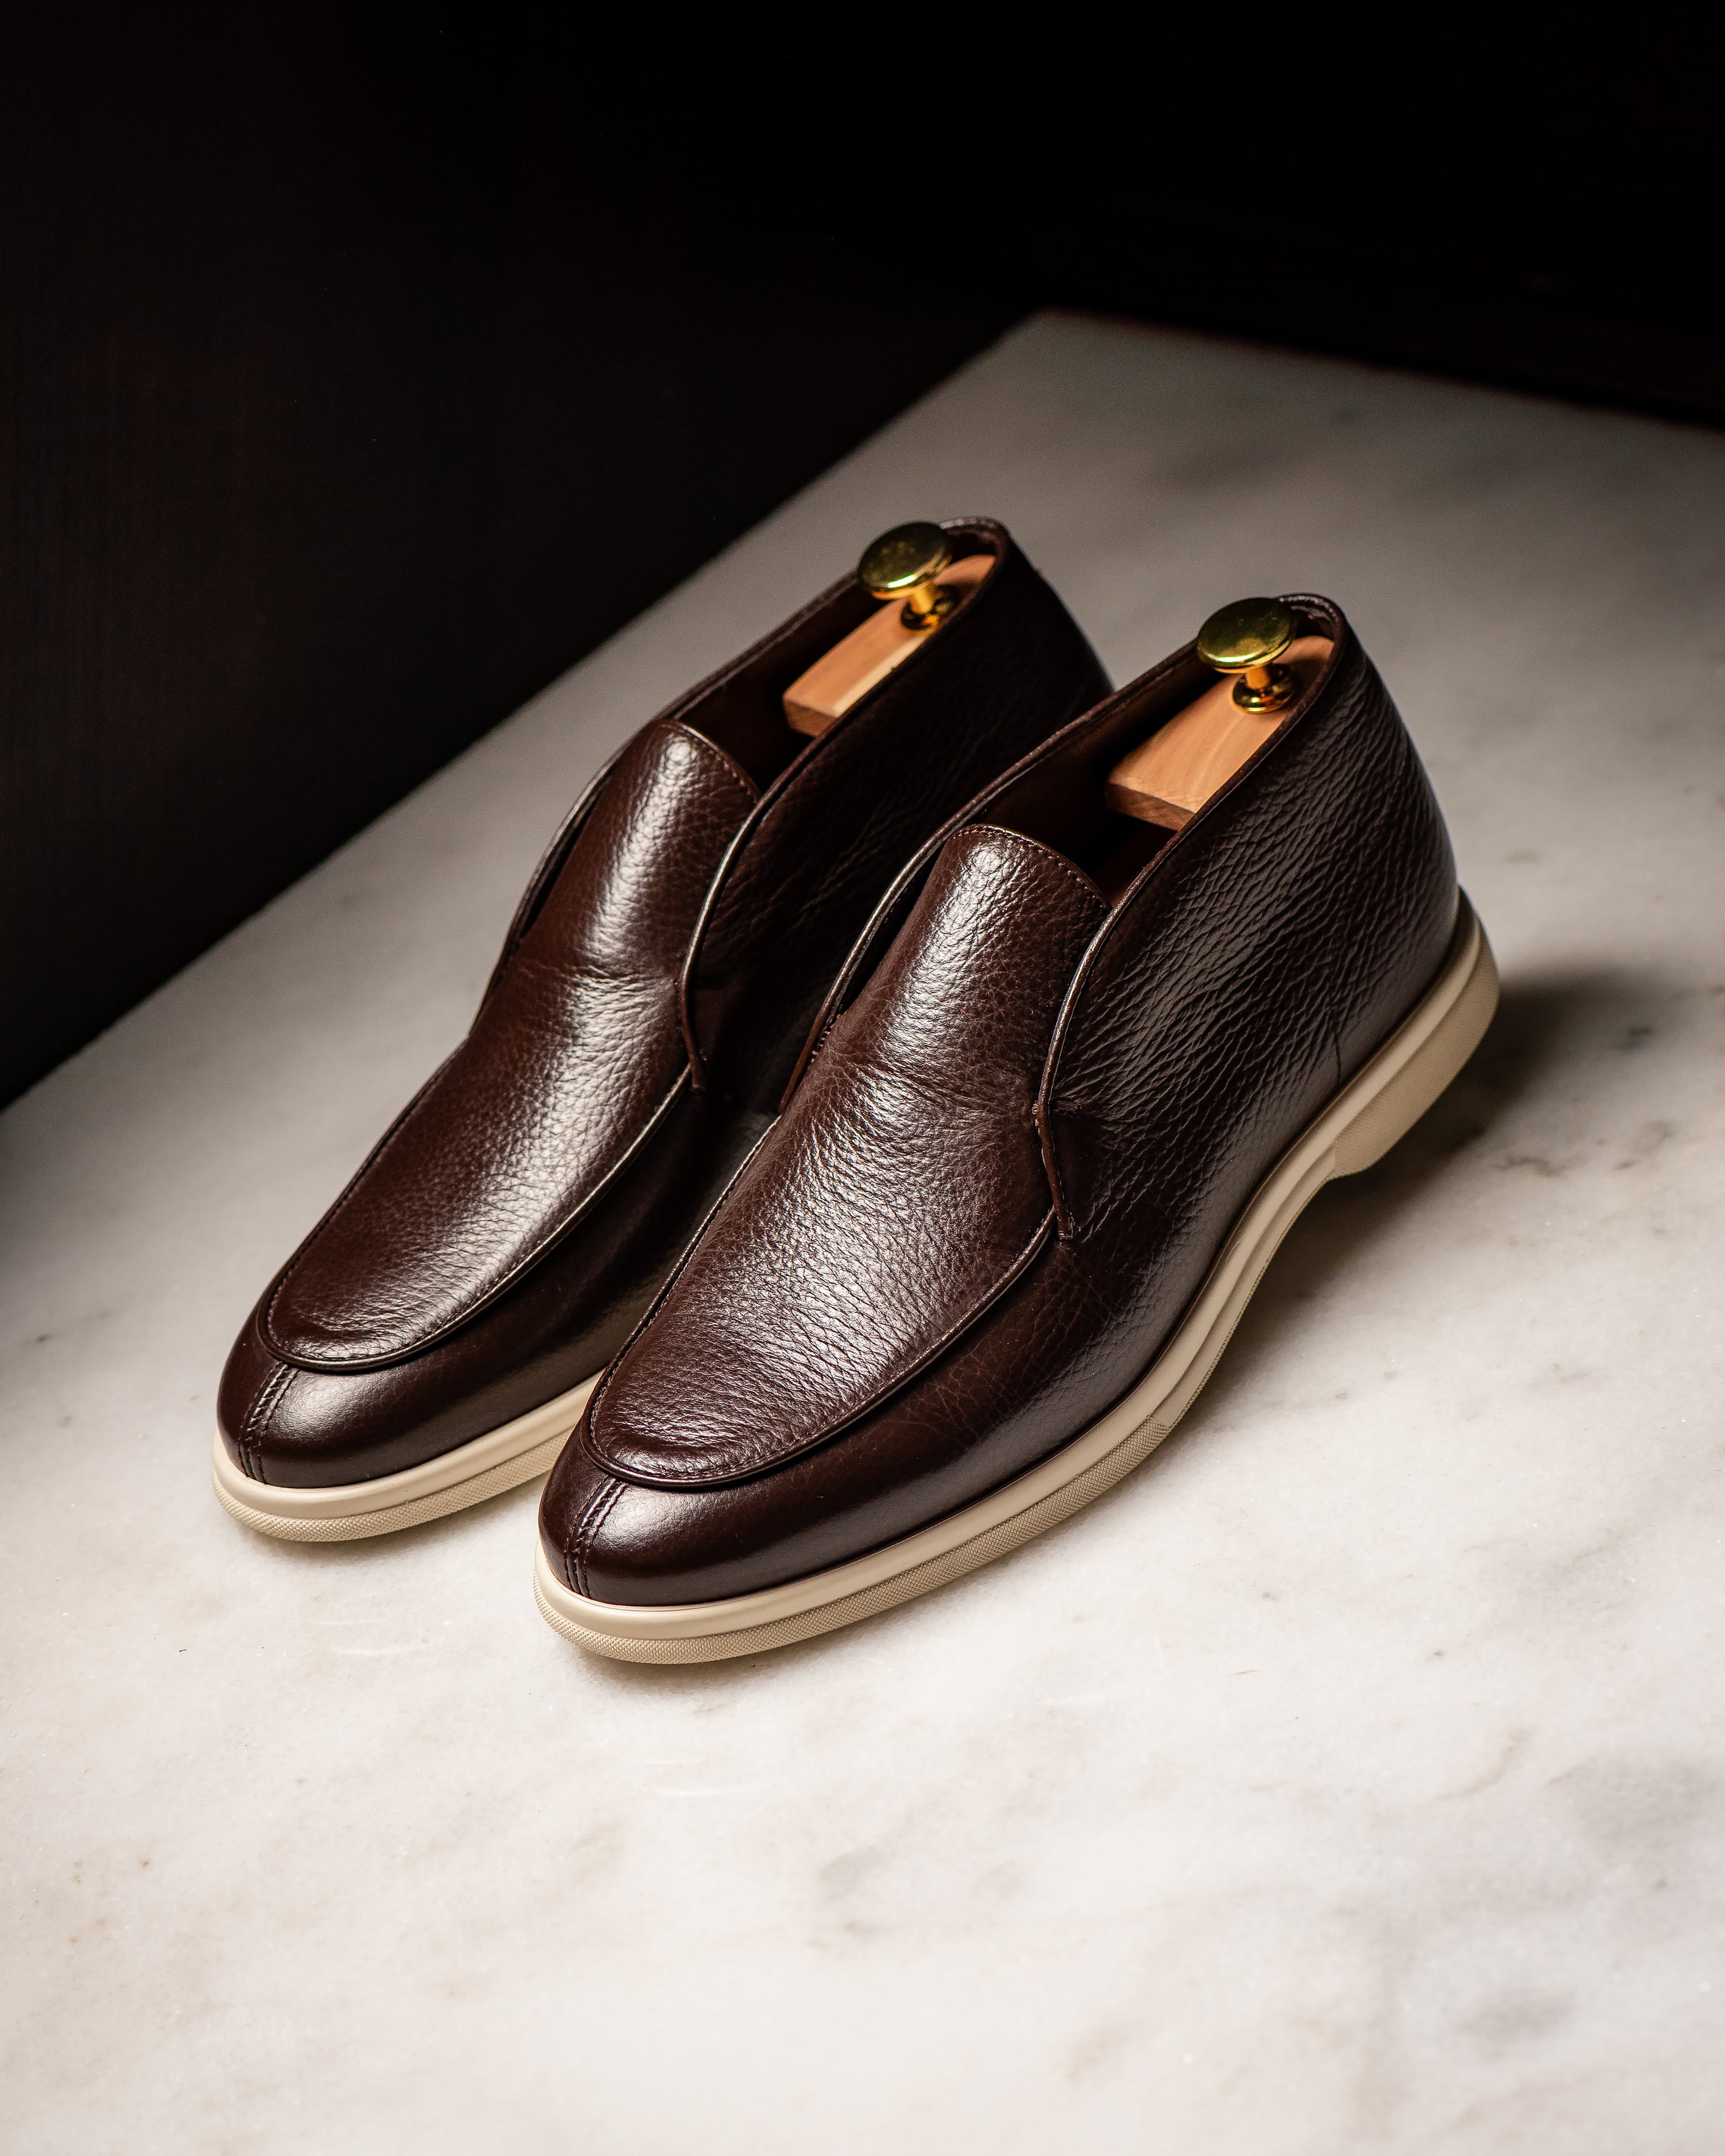 City Loafers - Mid Top in Grain Leather Dark Brown